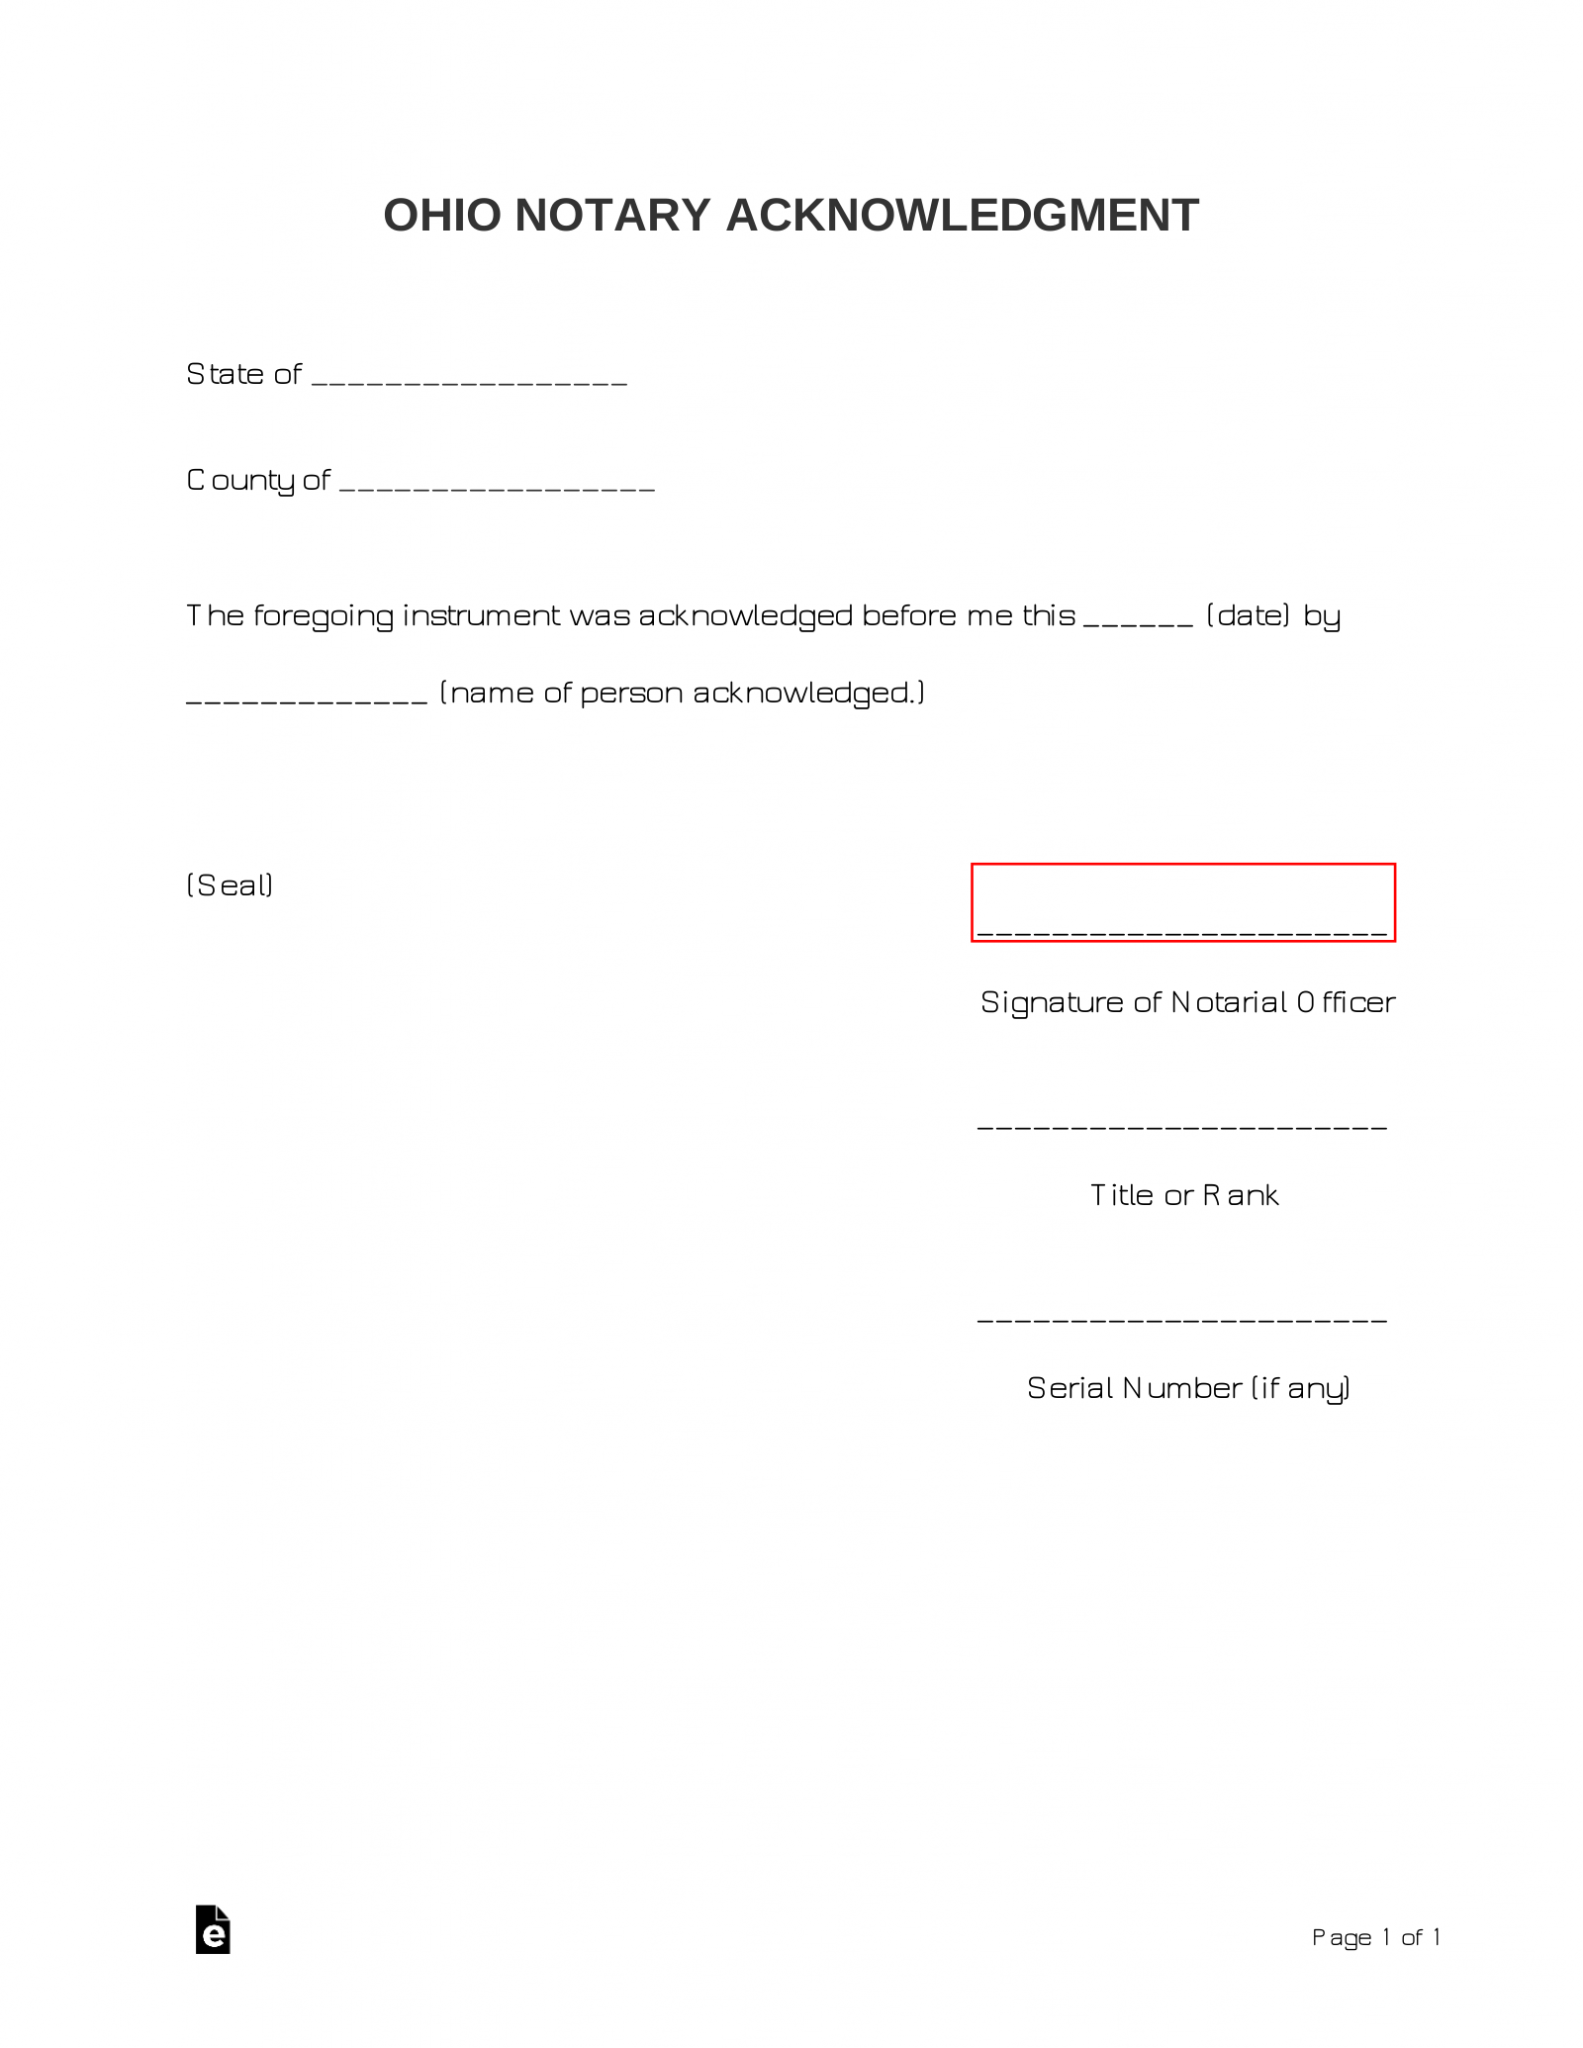 Free Ohio Notary Acknowledgment Form - PDF | Word – eForms